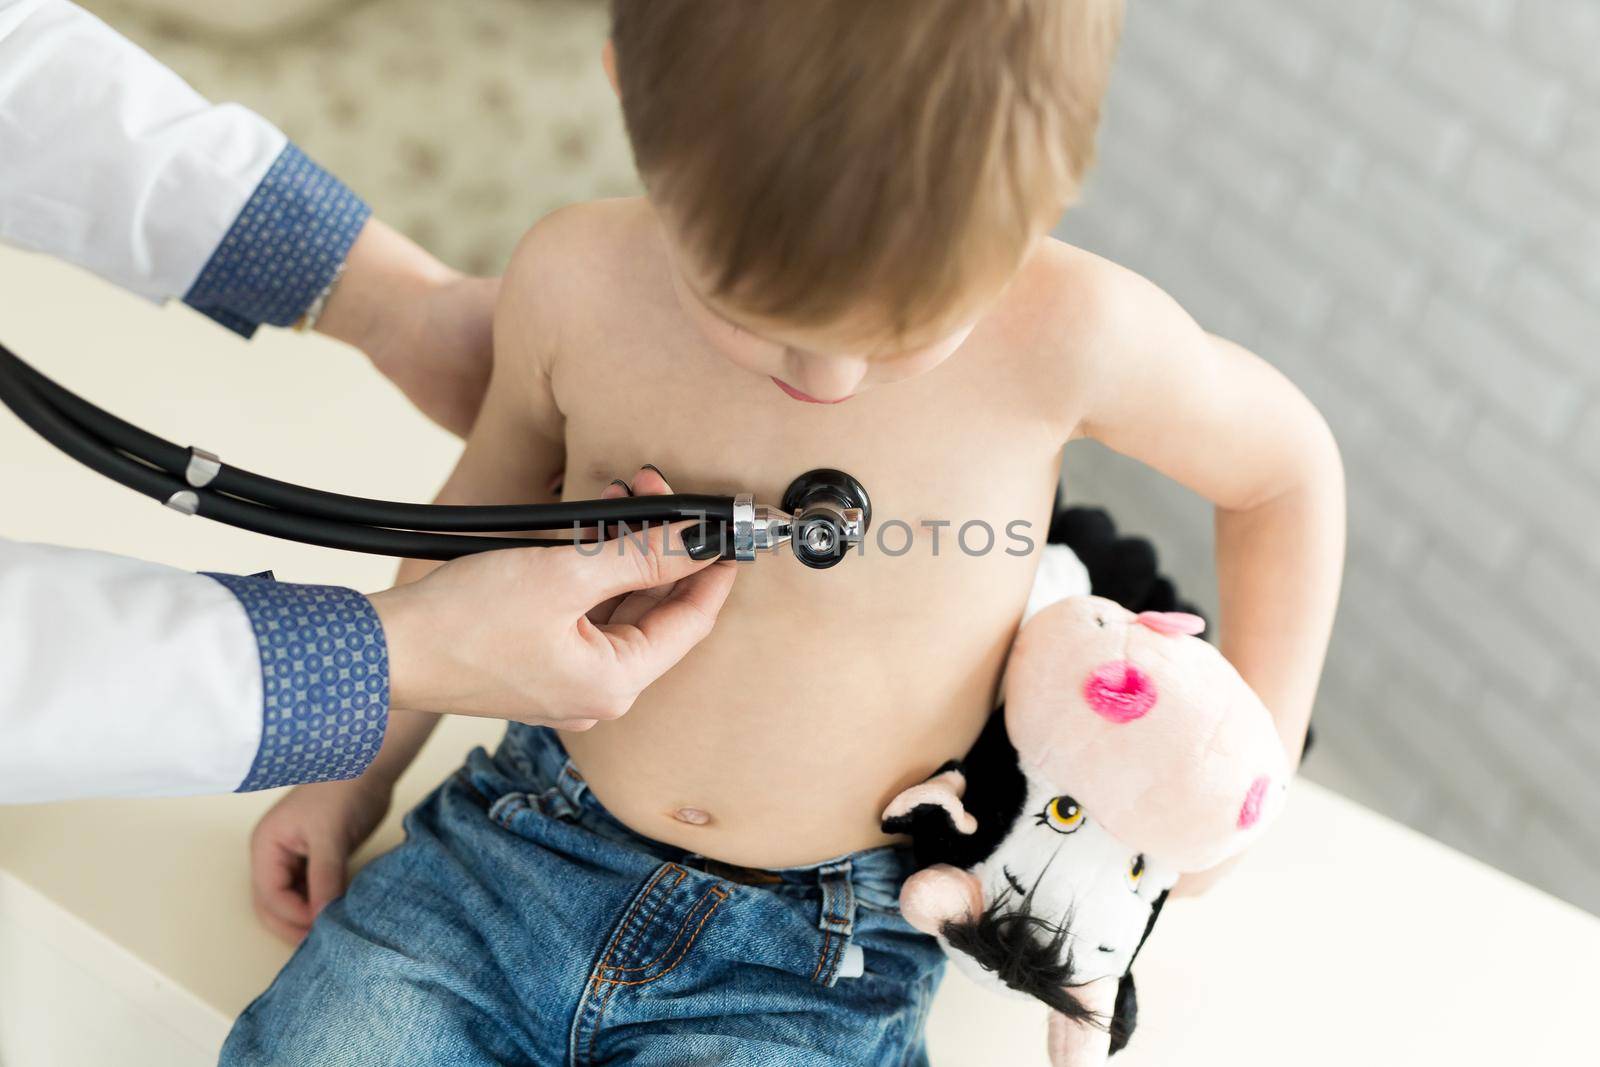 Professional general medical pediatrician doctor in white uniform gown listen lung and heart sound of child patient with stethoscope by StudioPeace